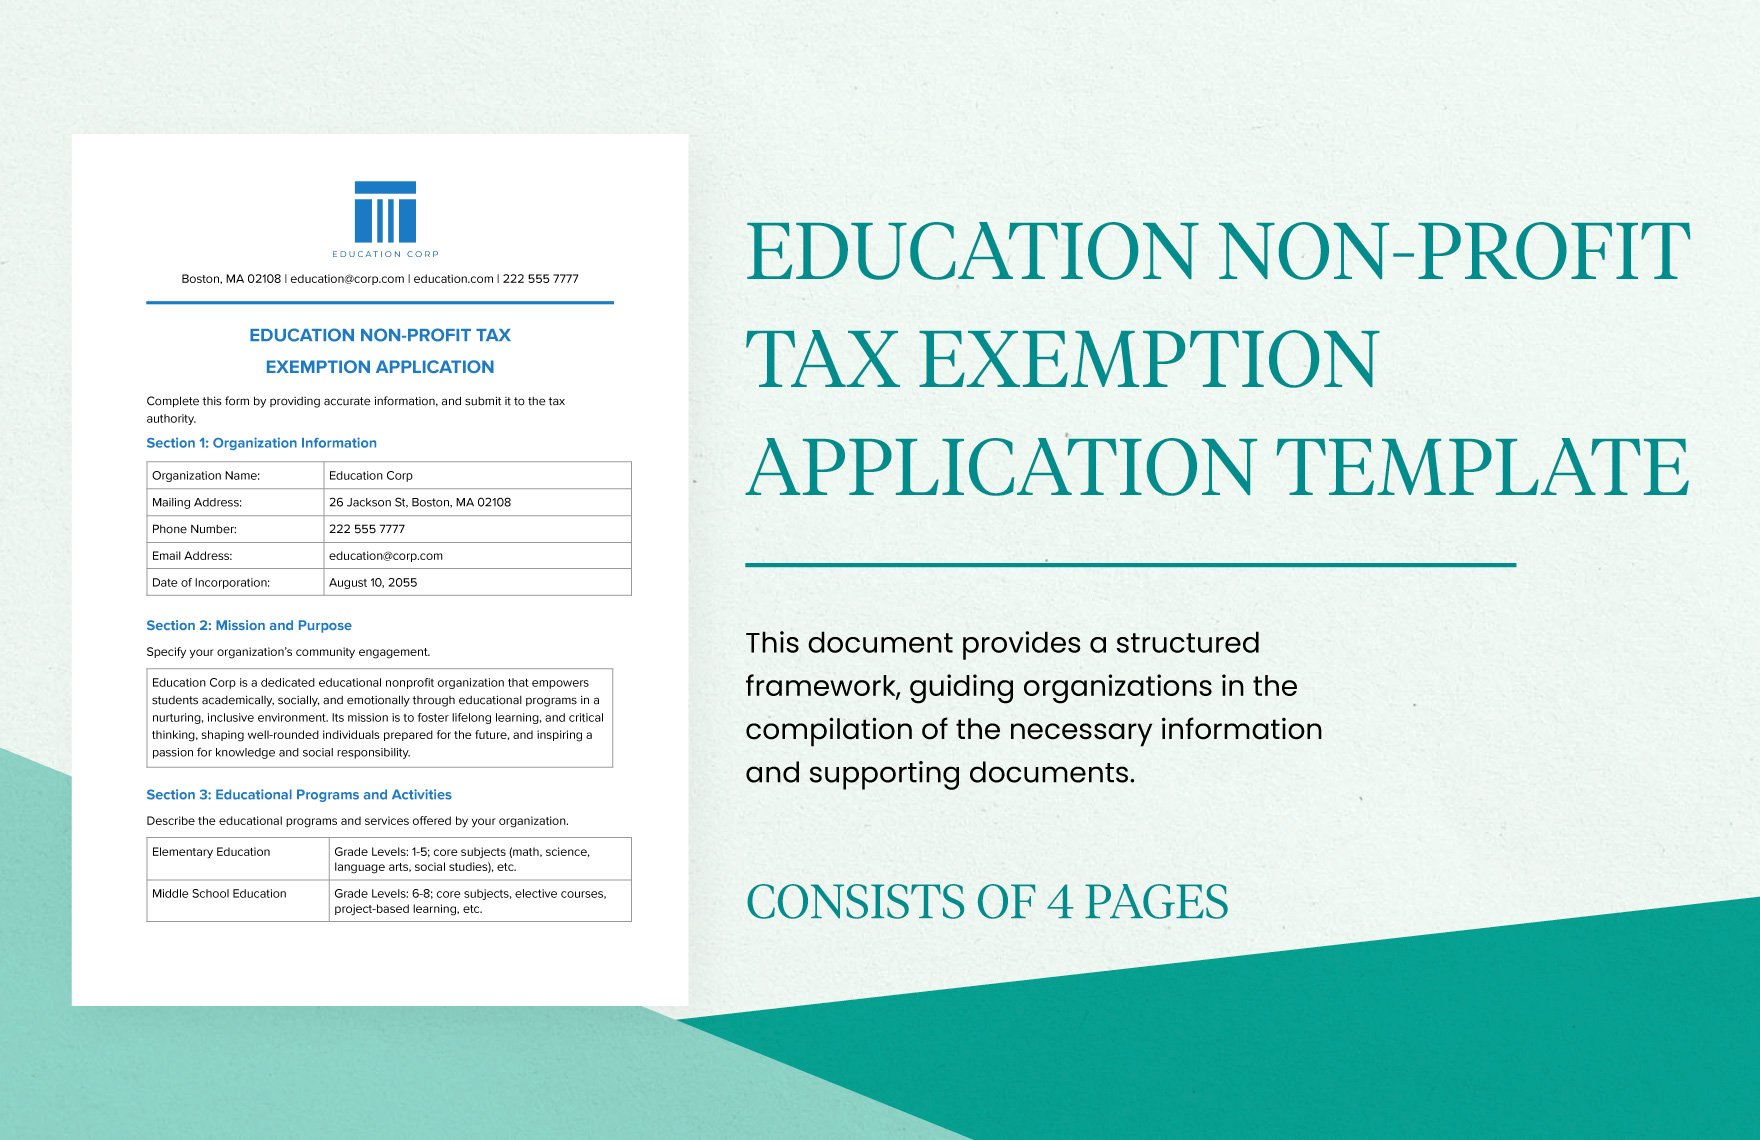 Education Non-Profit Tax Exemption Application Template in Word, Google Docs, PDF